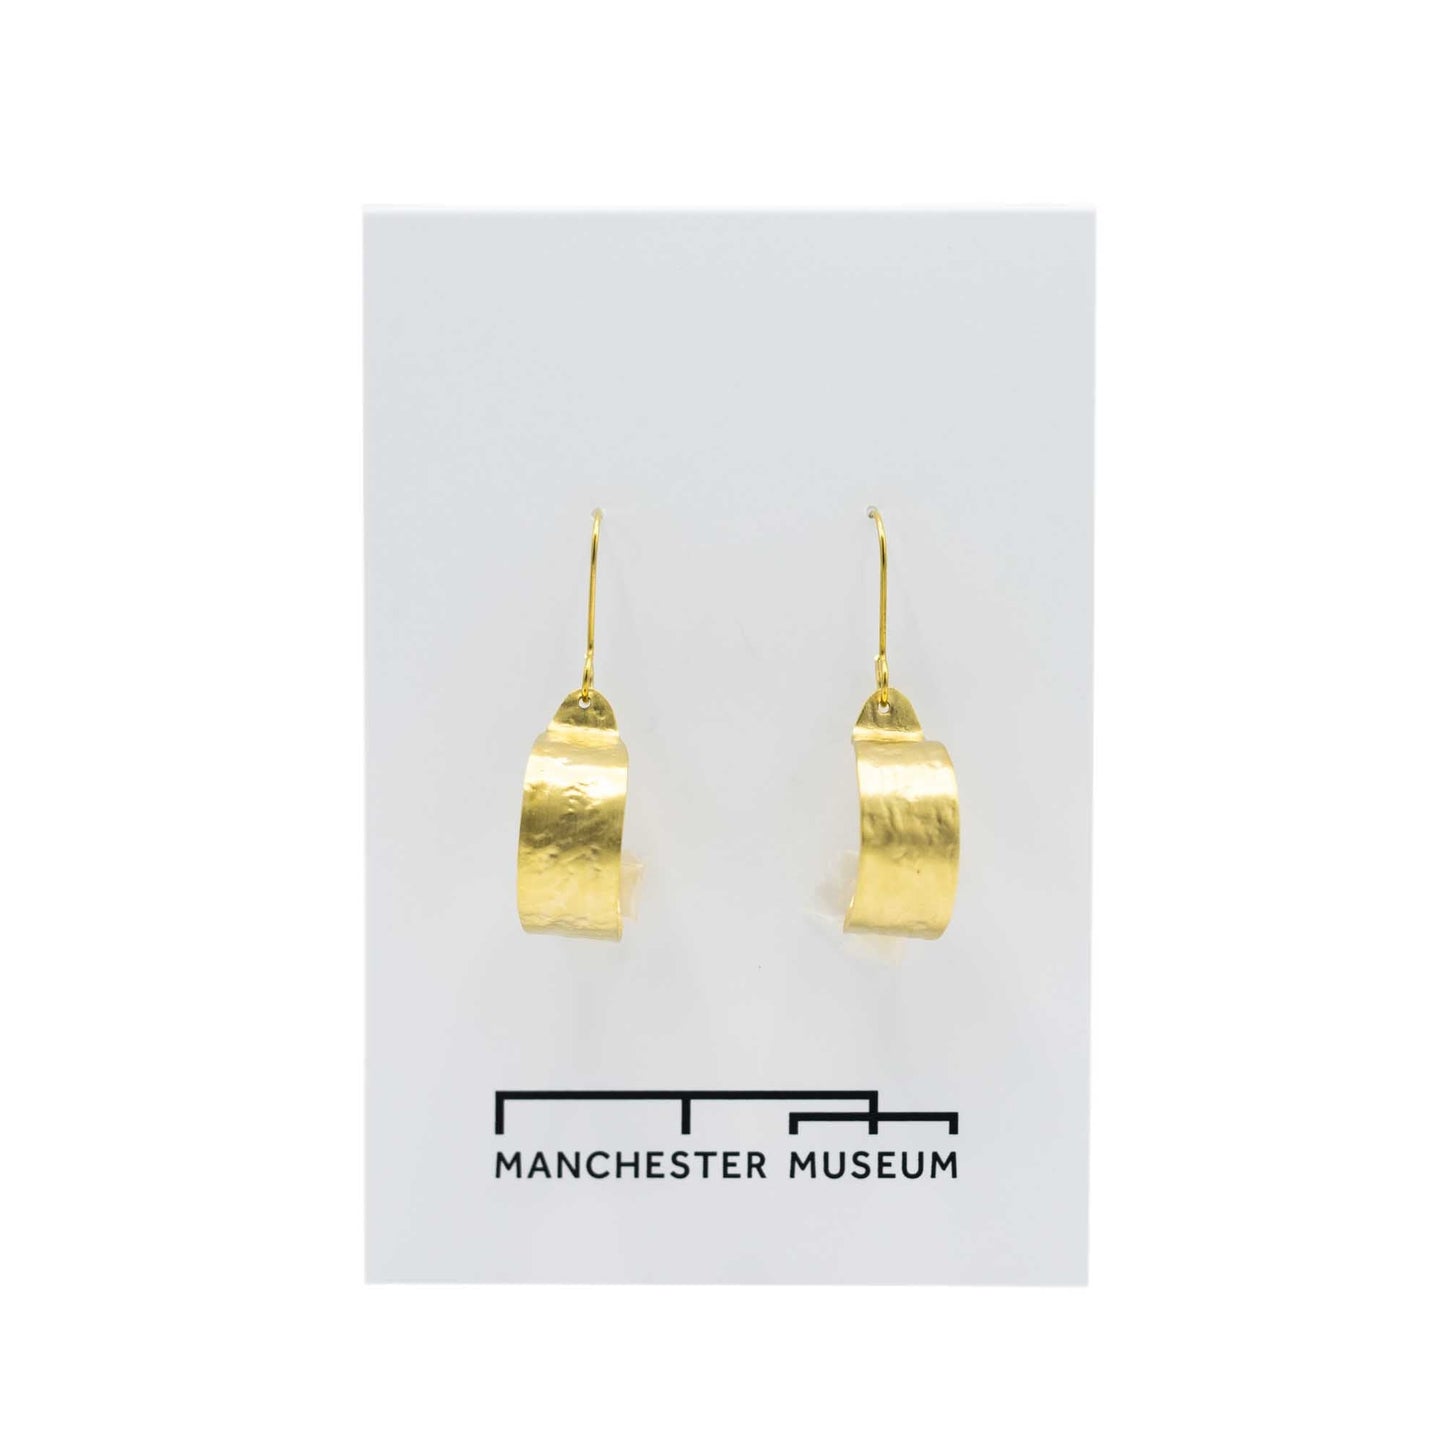 Hammered brass hoop earrings on a white, museum branded backing card.